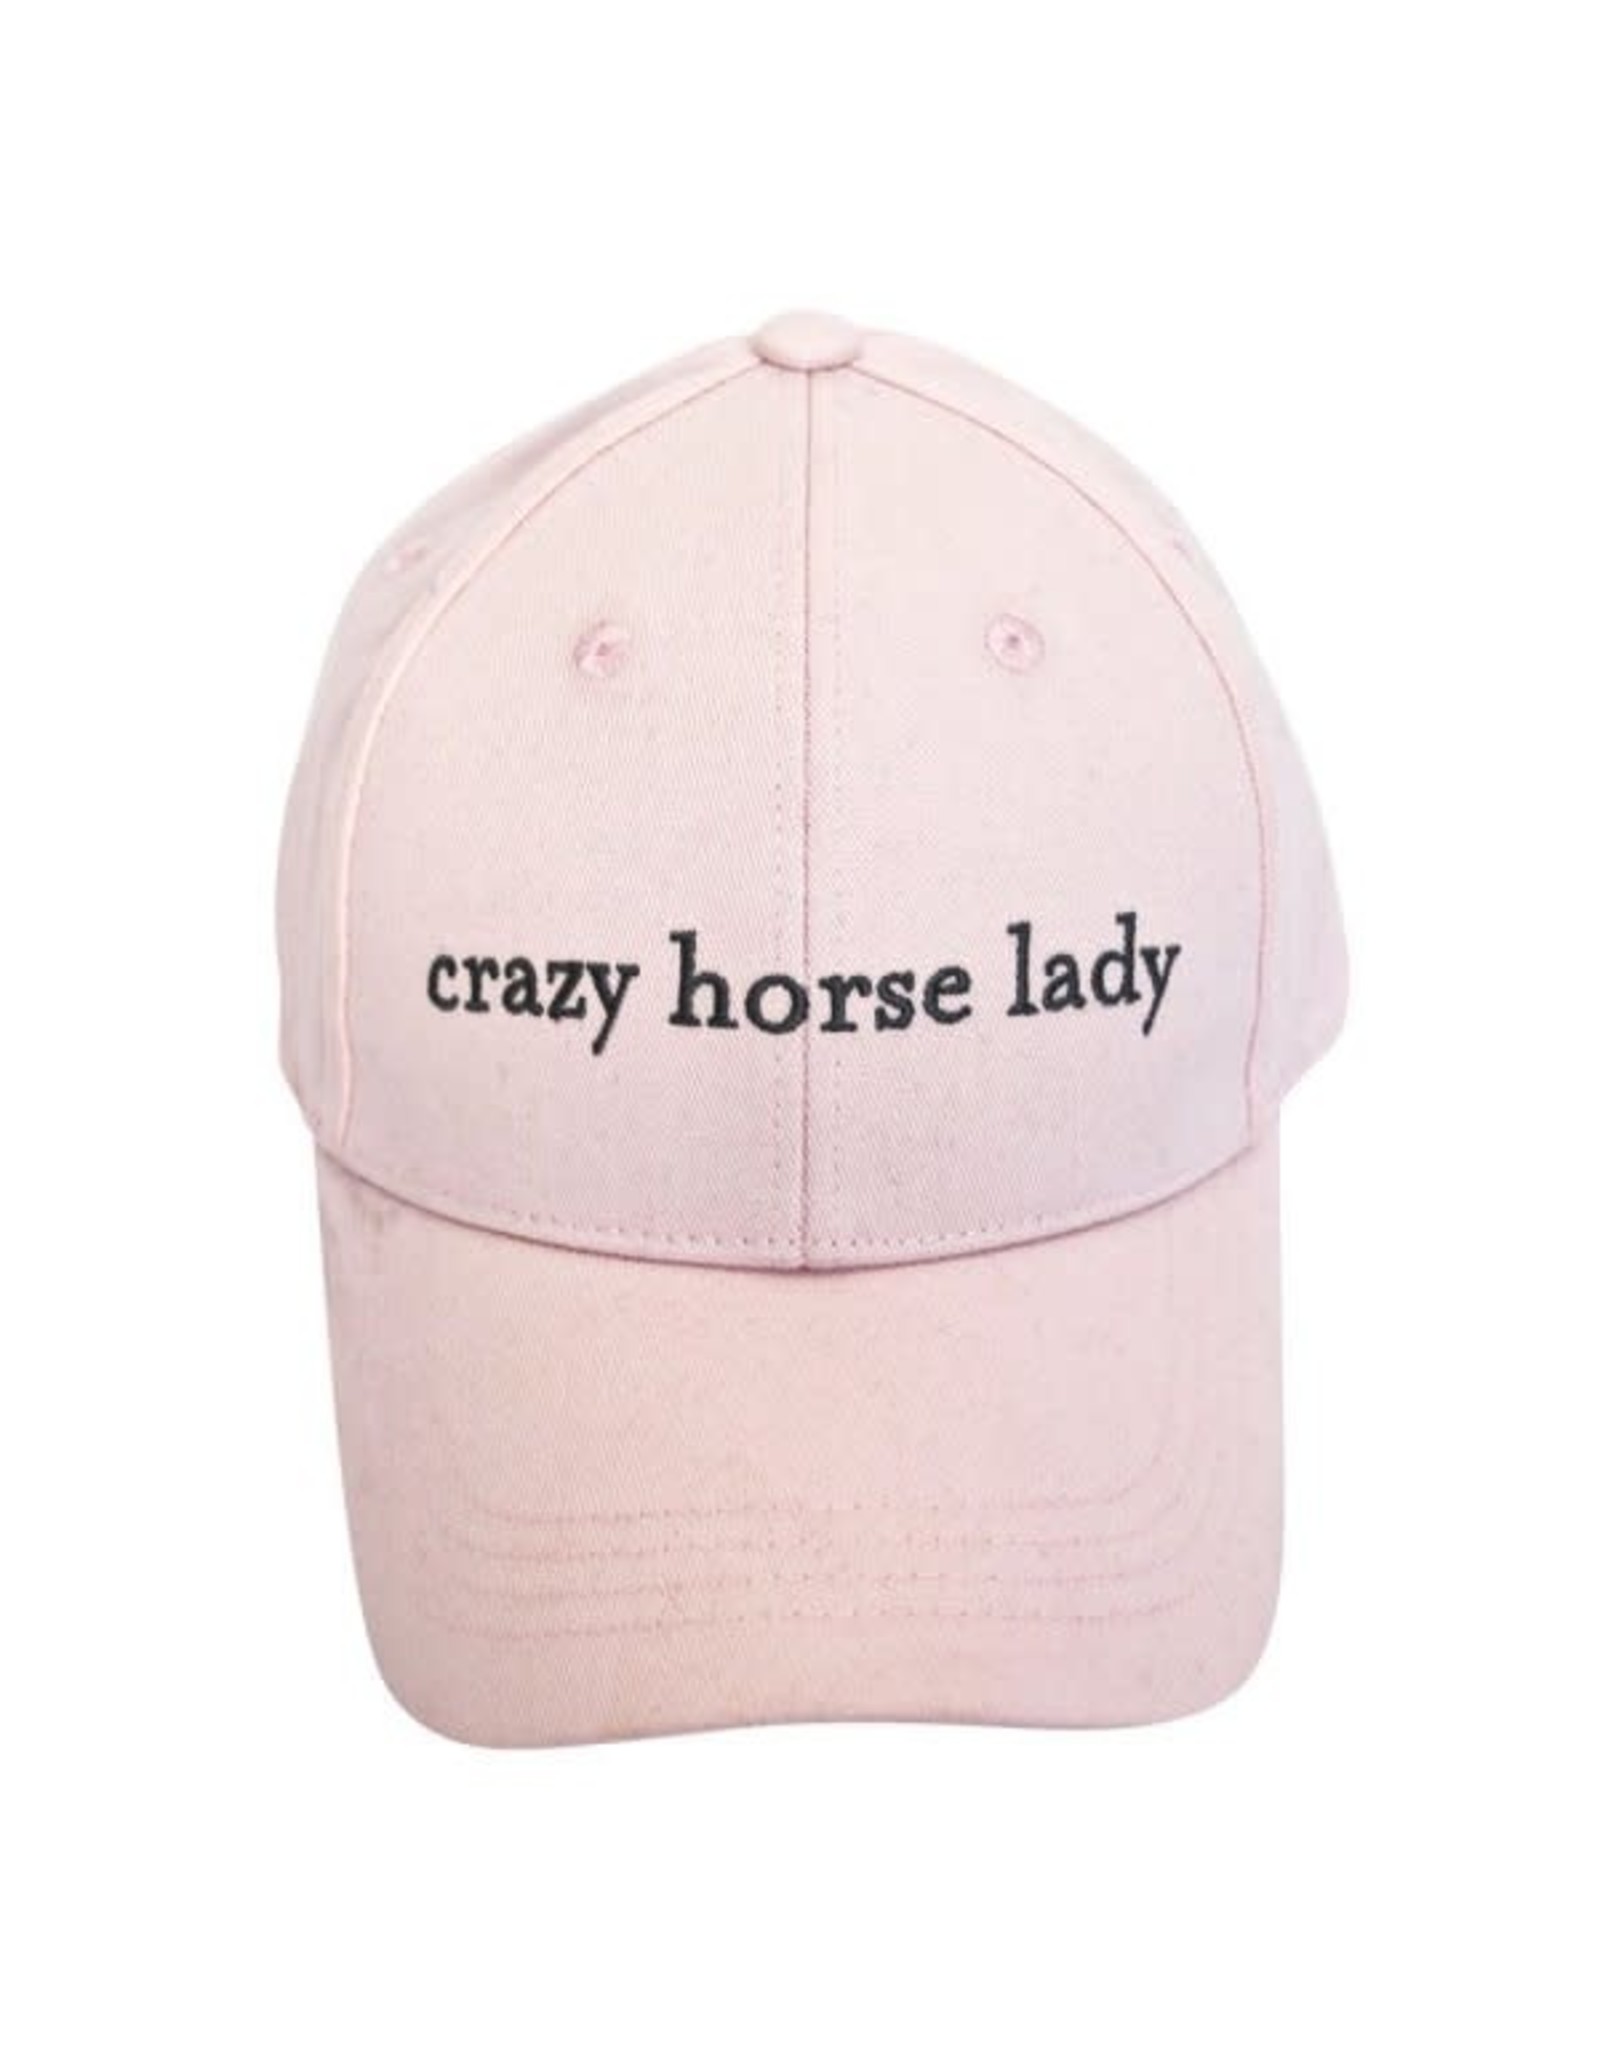 SPICED CRAZY HORSE LADY RINGSIDE HAT